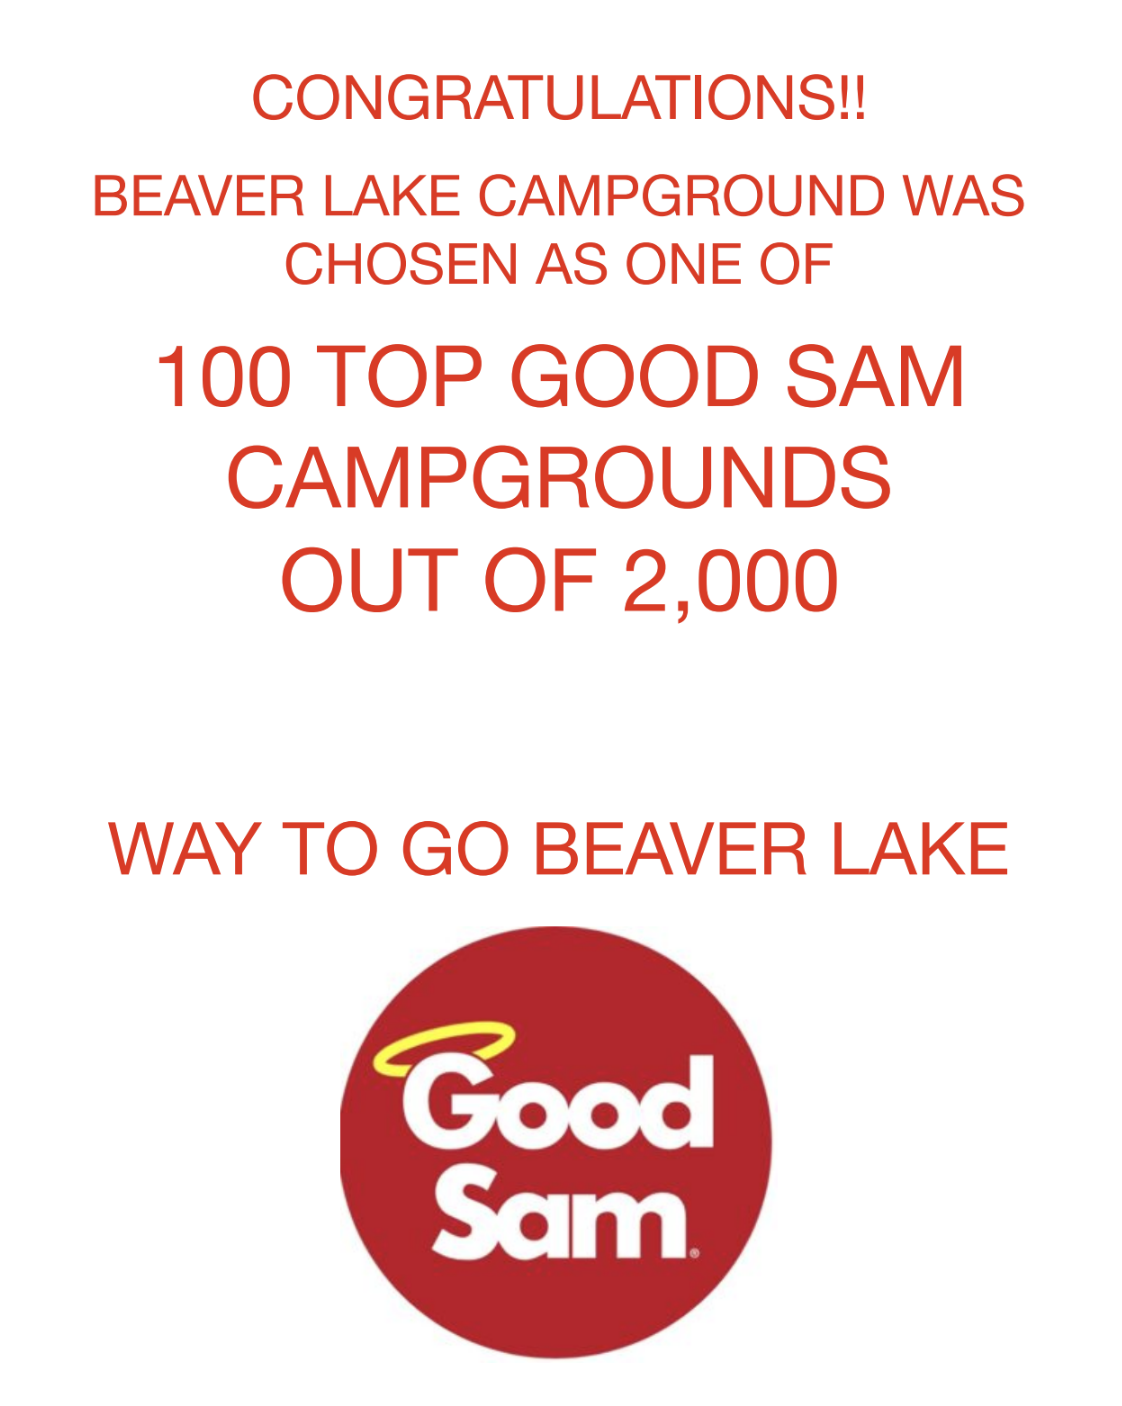 Congratulations Beaver Lake Campground was chosen as one of 100 Top Good Sam Campground out of 2,000